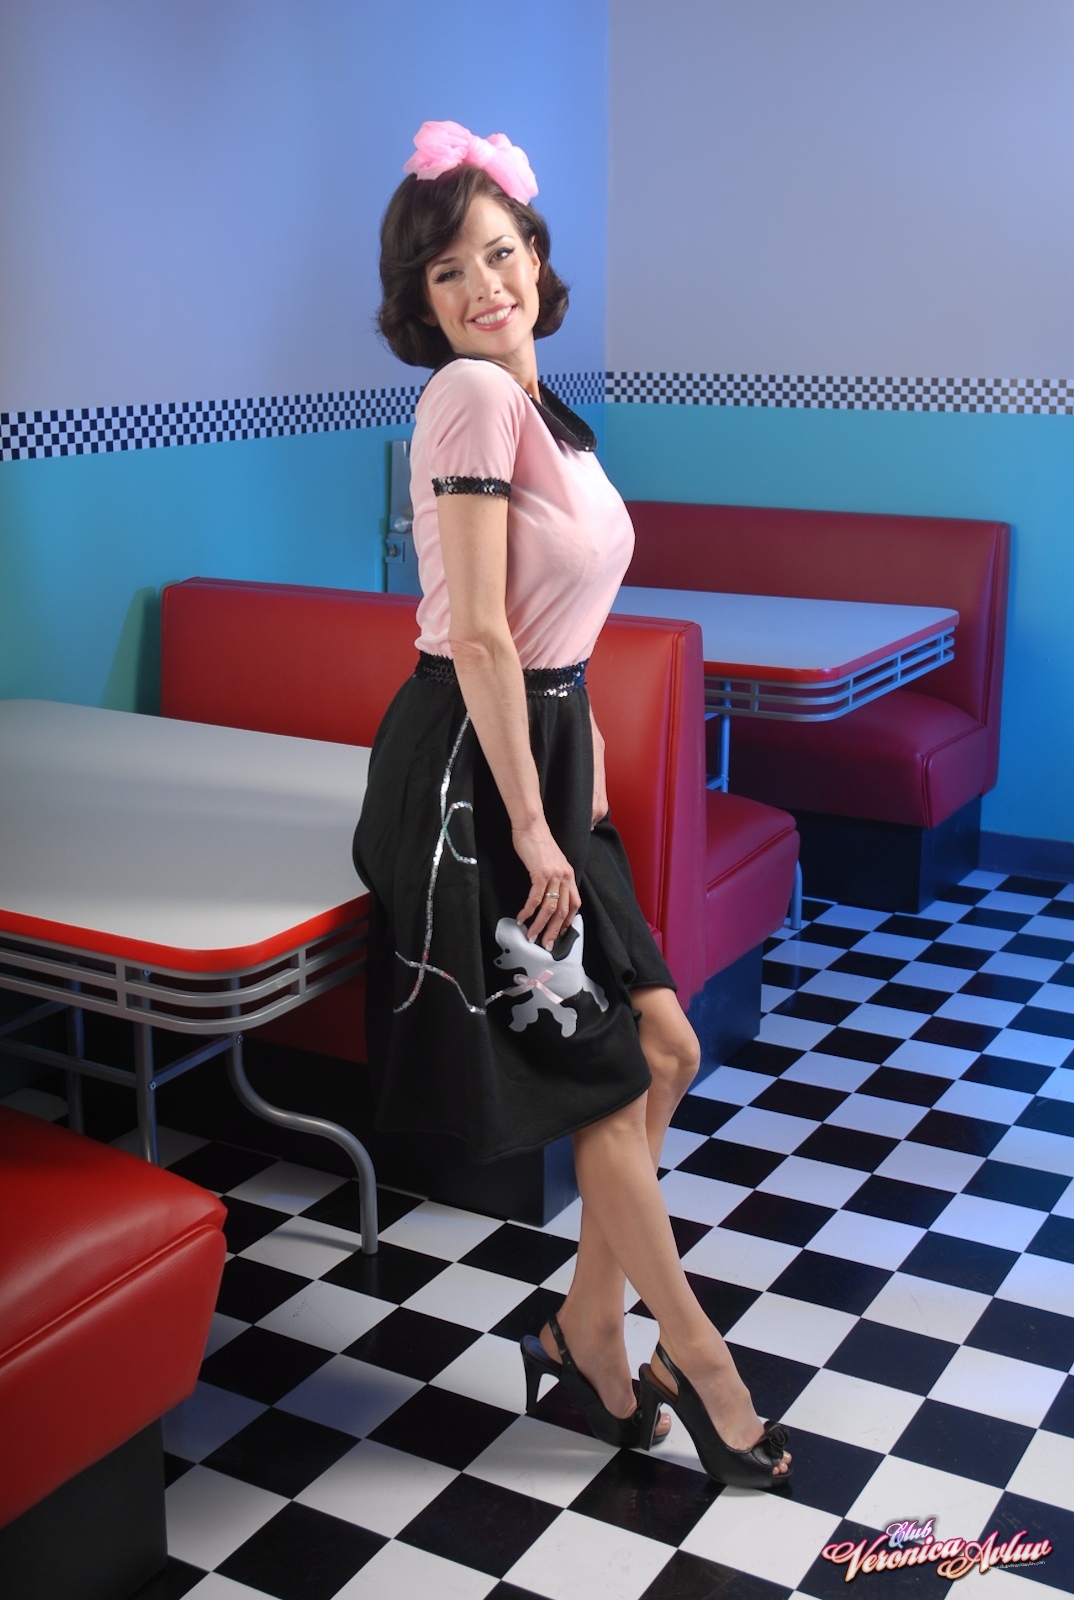 /content/club-veronica-avluv/galleries/back_working_at_the_diner-021111/full/veronica_avluv-diner-010.jpg